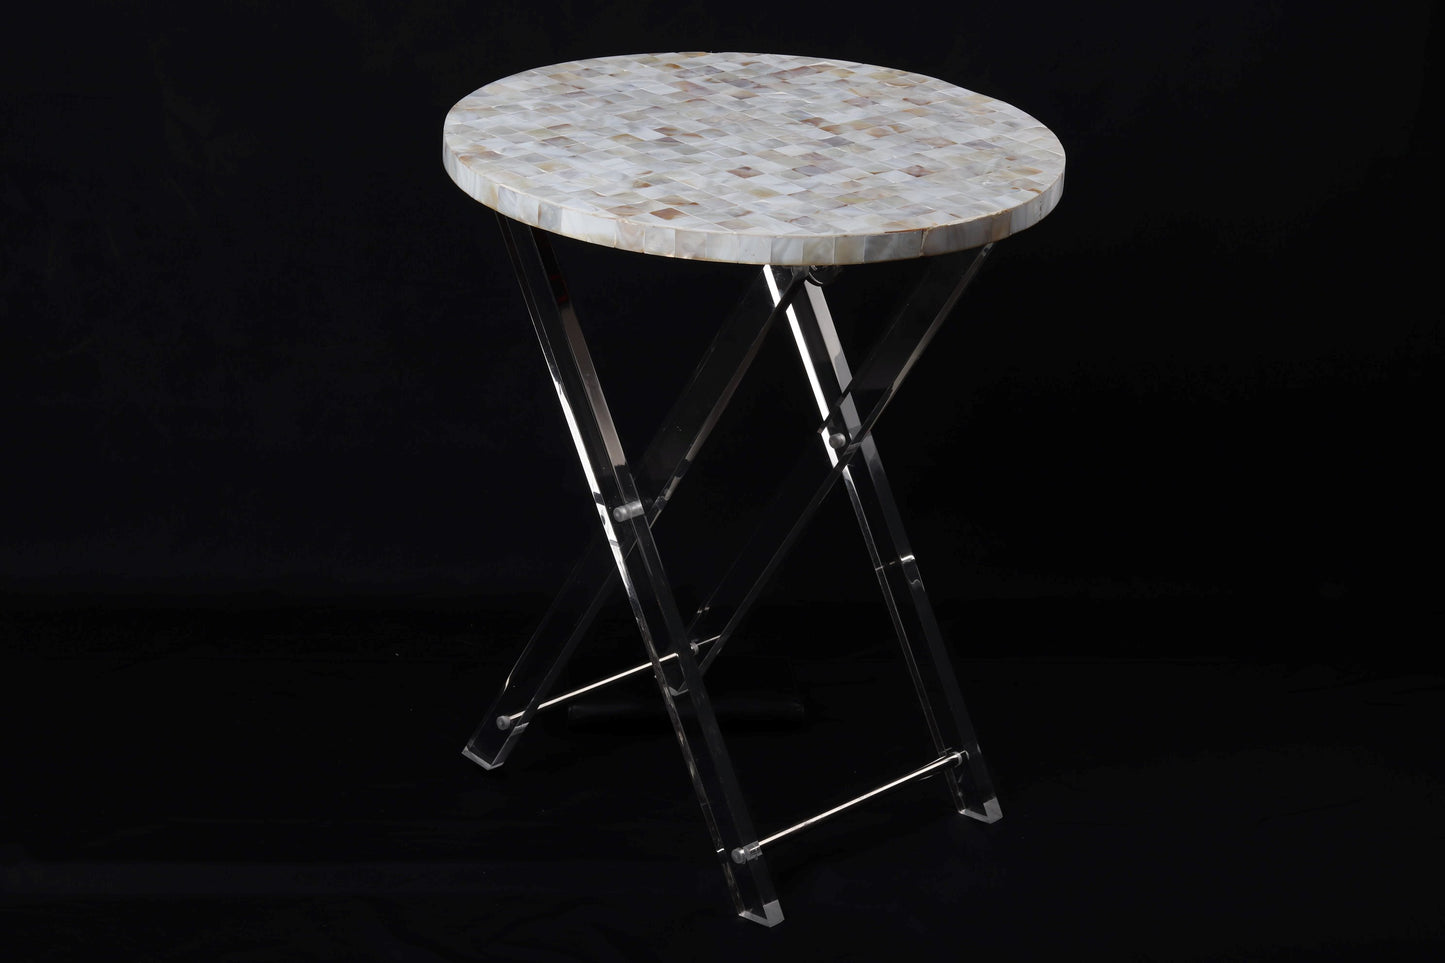 Serving Tables - Covered in mother of pearl - Set of 2